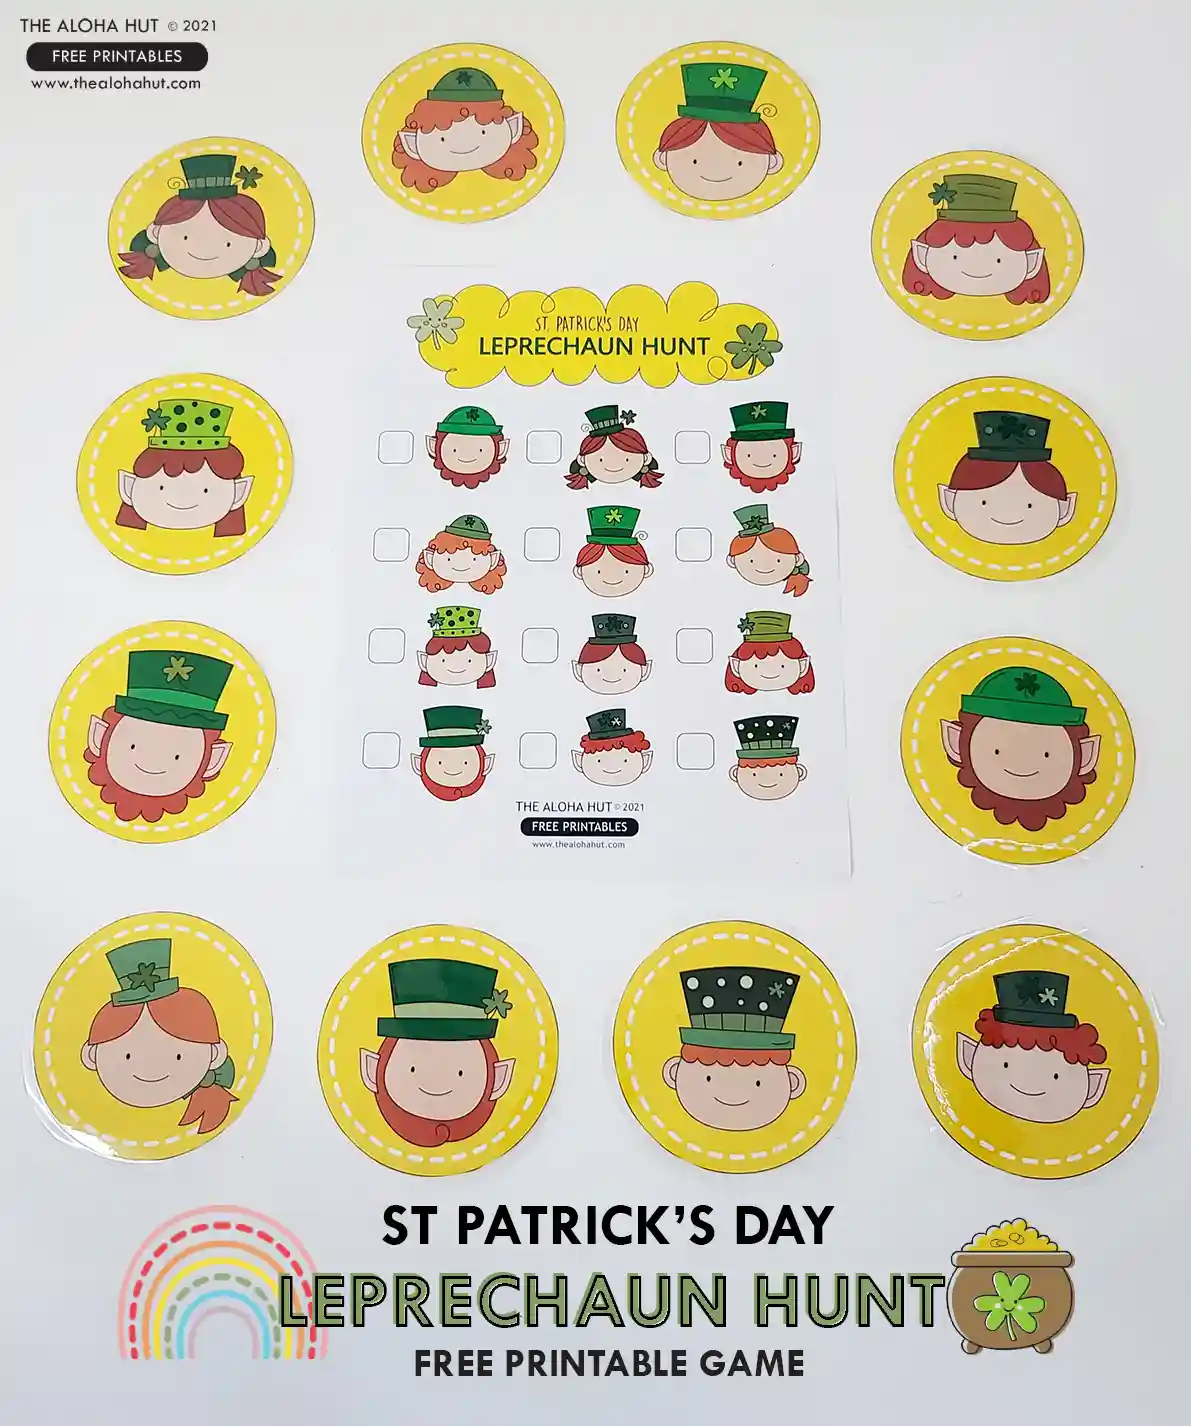 Printable St. Patrick's Day game to help you celebrate St. Patrick's Day and throw a magical St. Patrick's Day party! Download the printable Leprechaun Hunt game (similar to a scavenger hunt game) and hide the leprechauns around the yard for the kids to find. You can also play the leprechaun hunt game indoors.